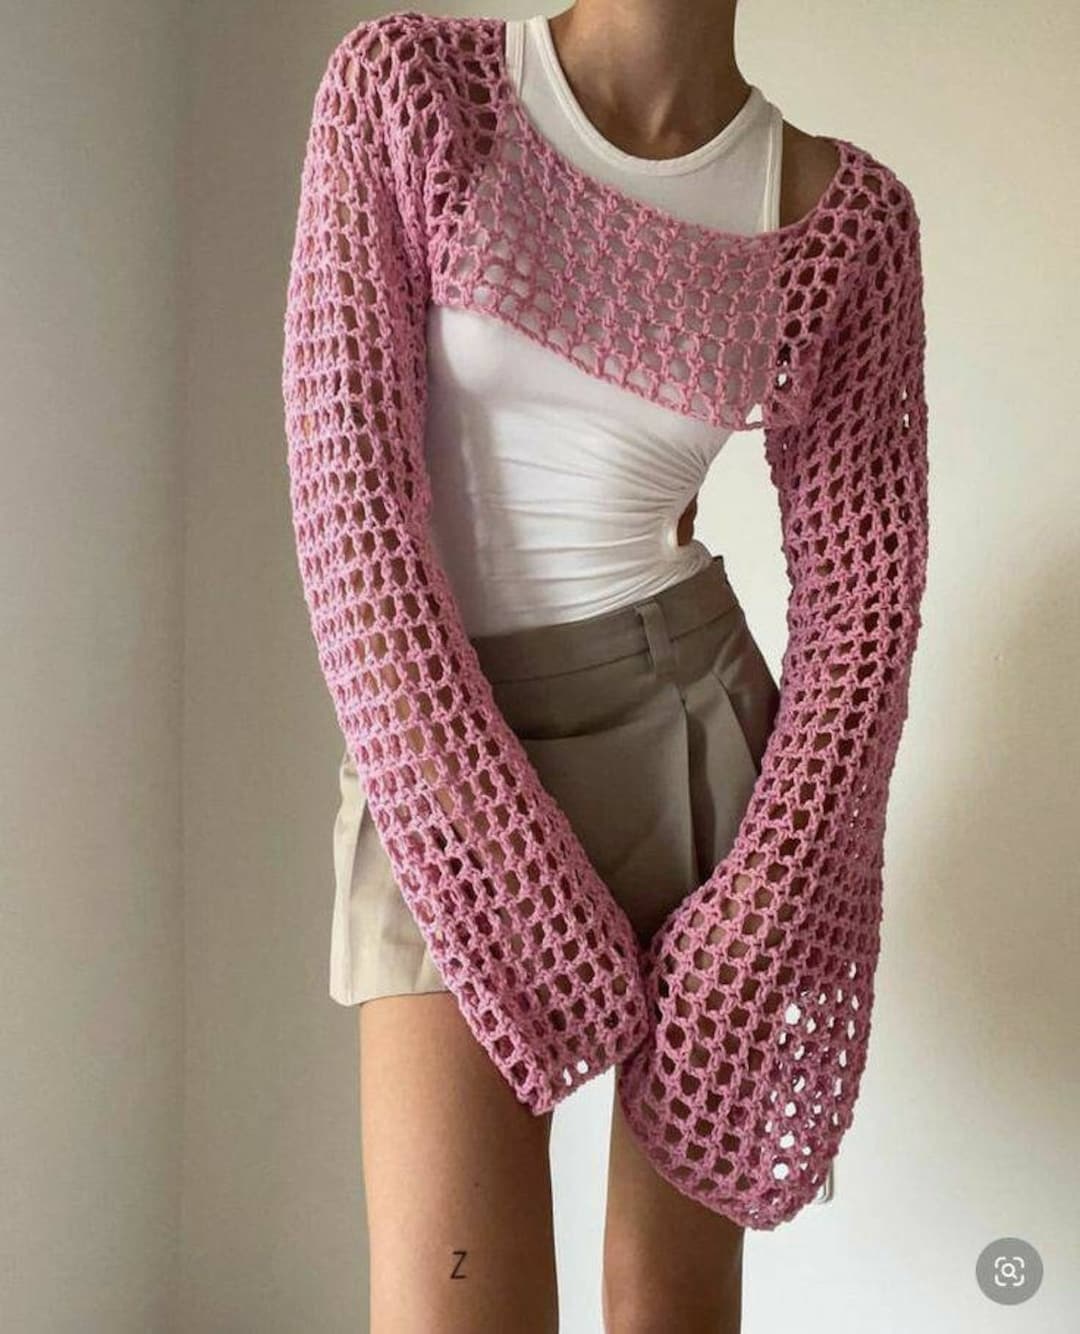 DAZY Hollow Out Trumpet Sleeve Super Crop Sweater Without Cami Top  Super  cropped sweater, Crochet long sleeve tops, Crochet top outfit